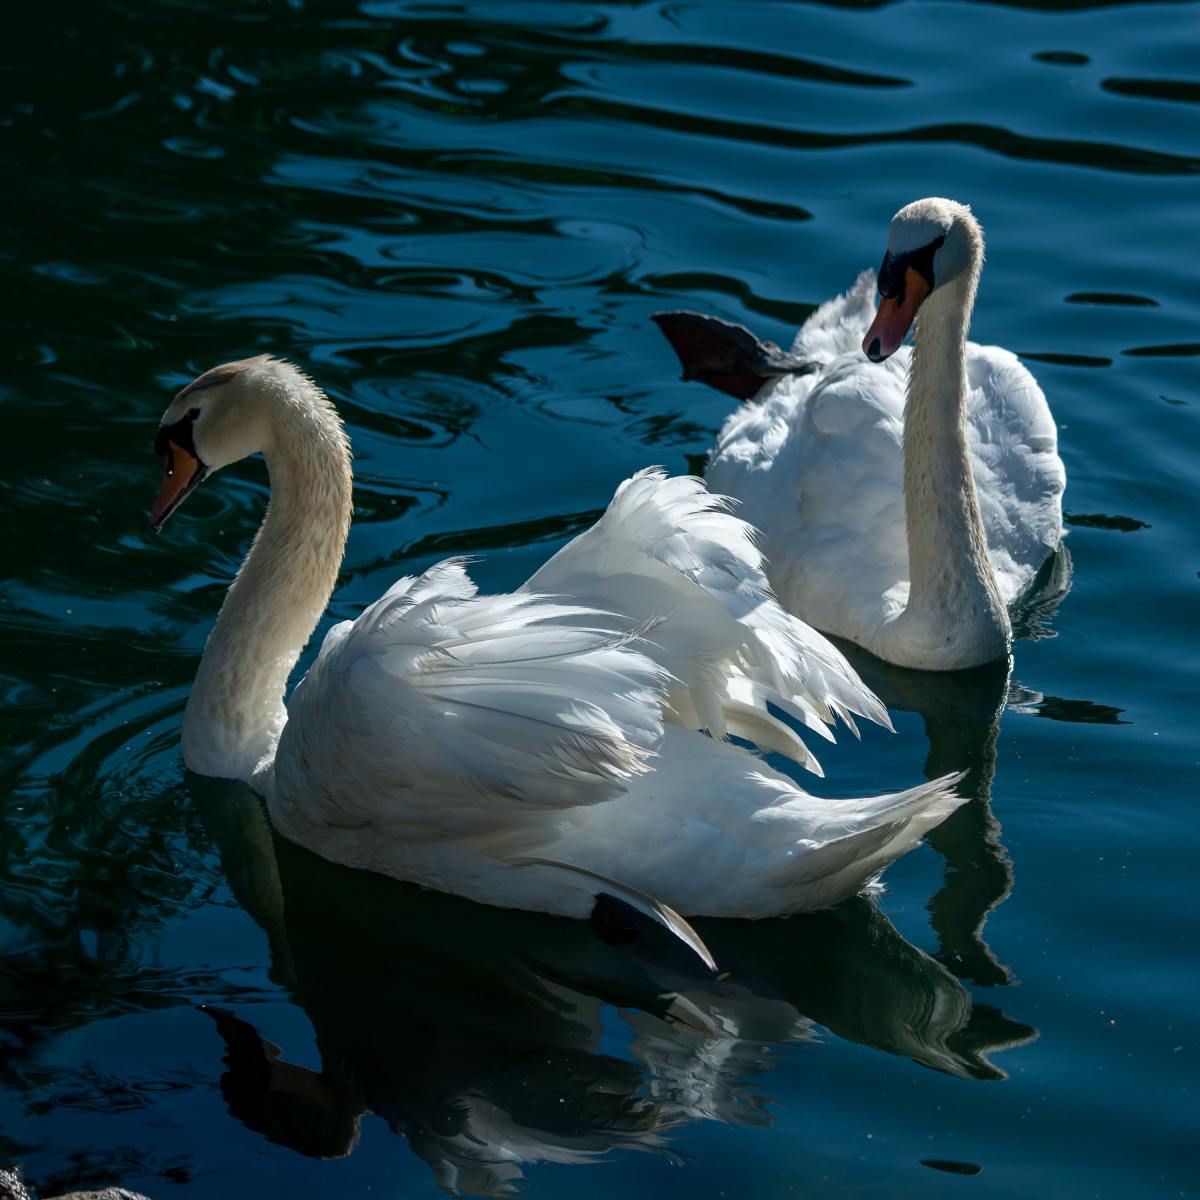 In the Myth of Lir, children are turned into swans by their jealous stepmother.